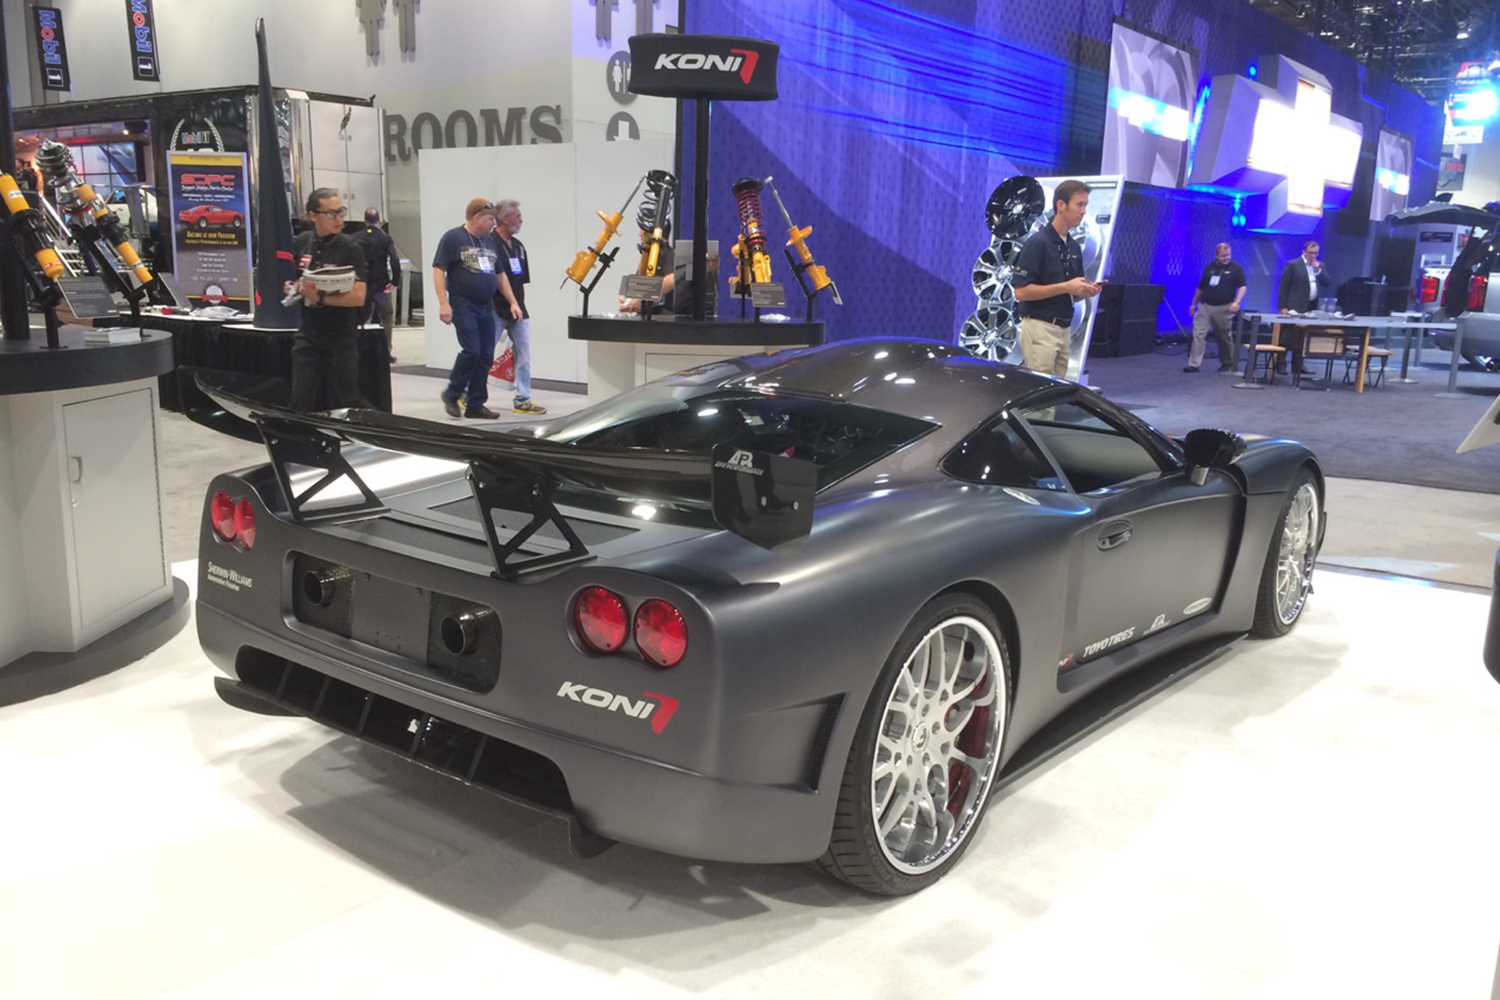 A Factory Five Racing GTM supercar based on a Corvette at the KONI Shocks booth at SEMA in 2014